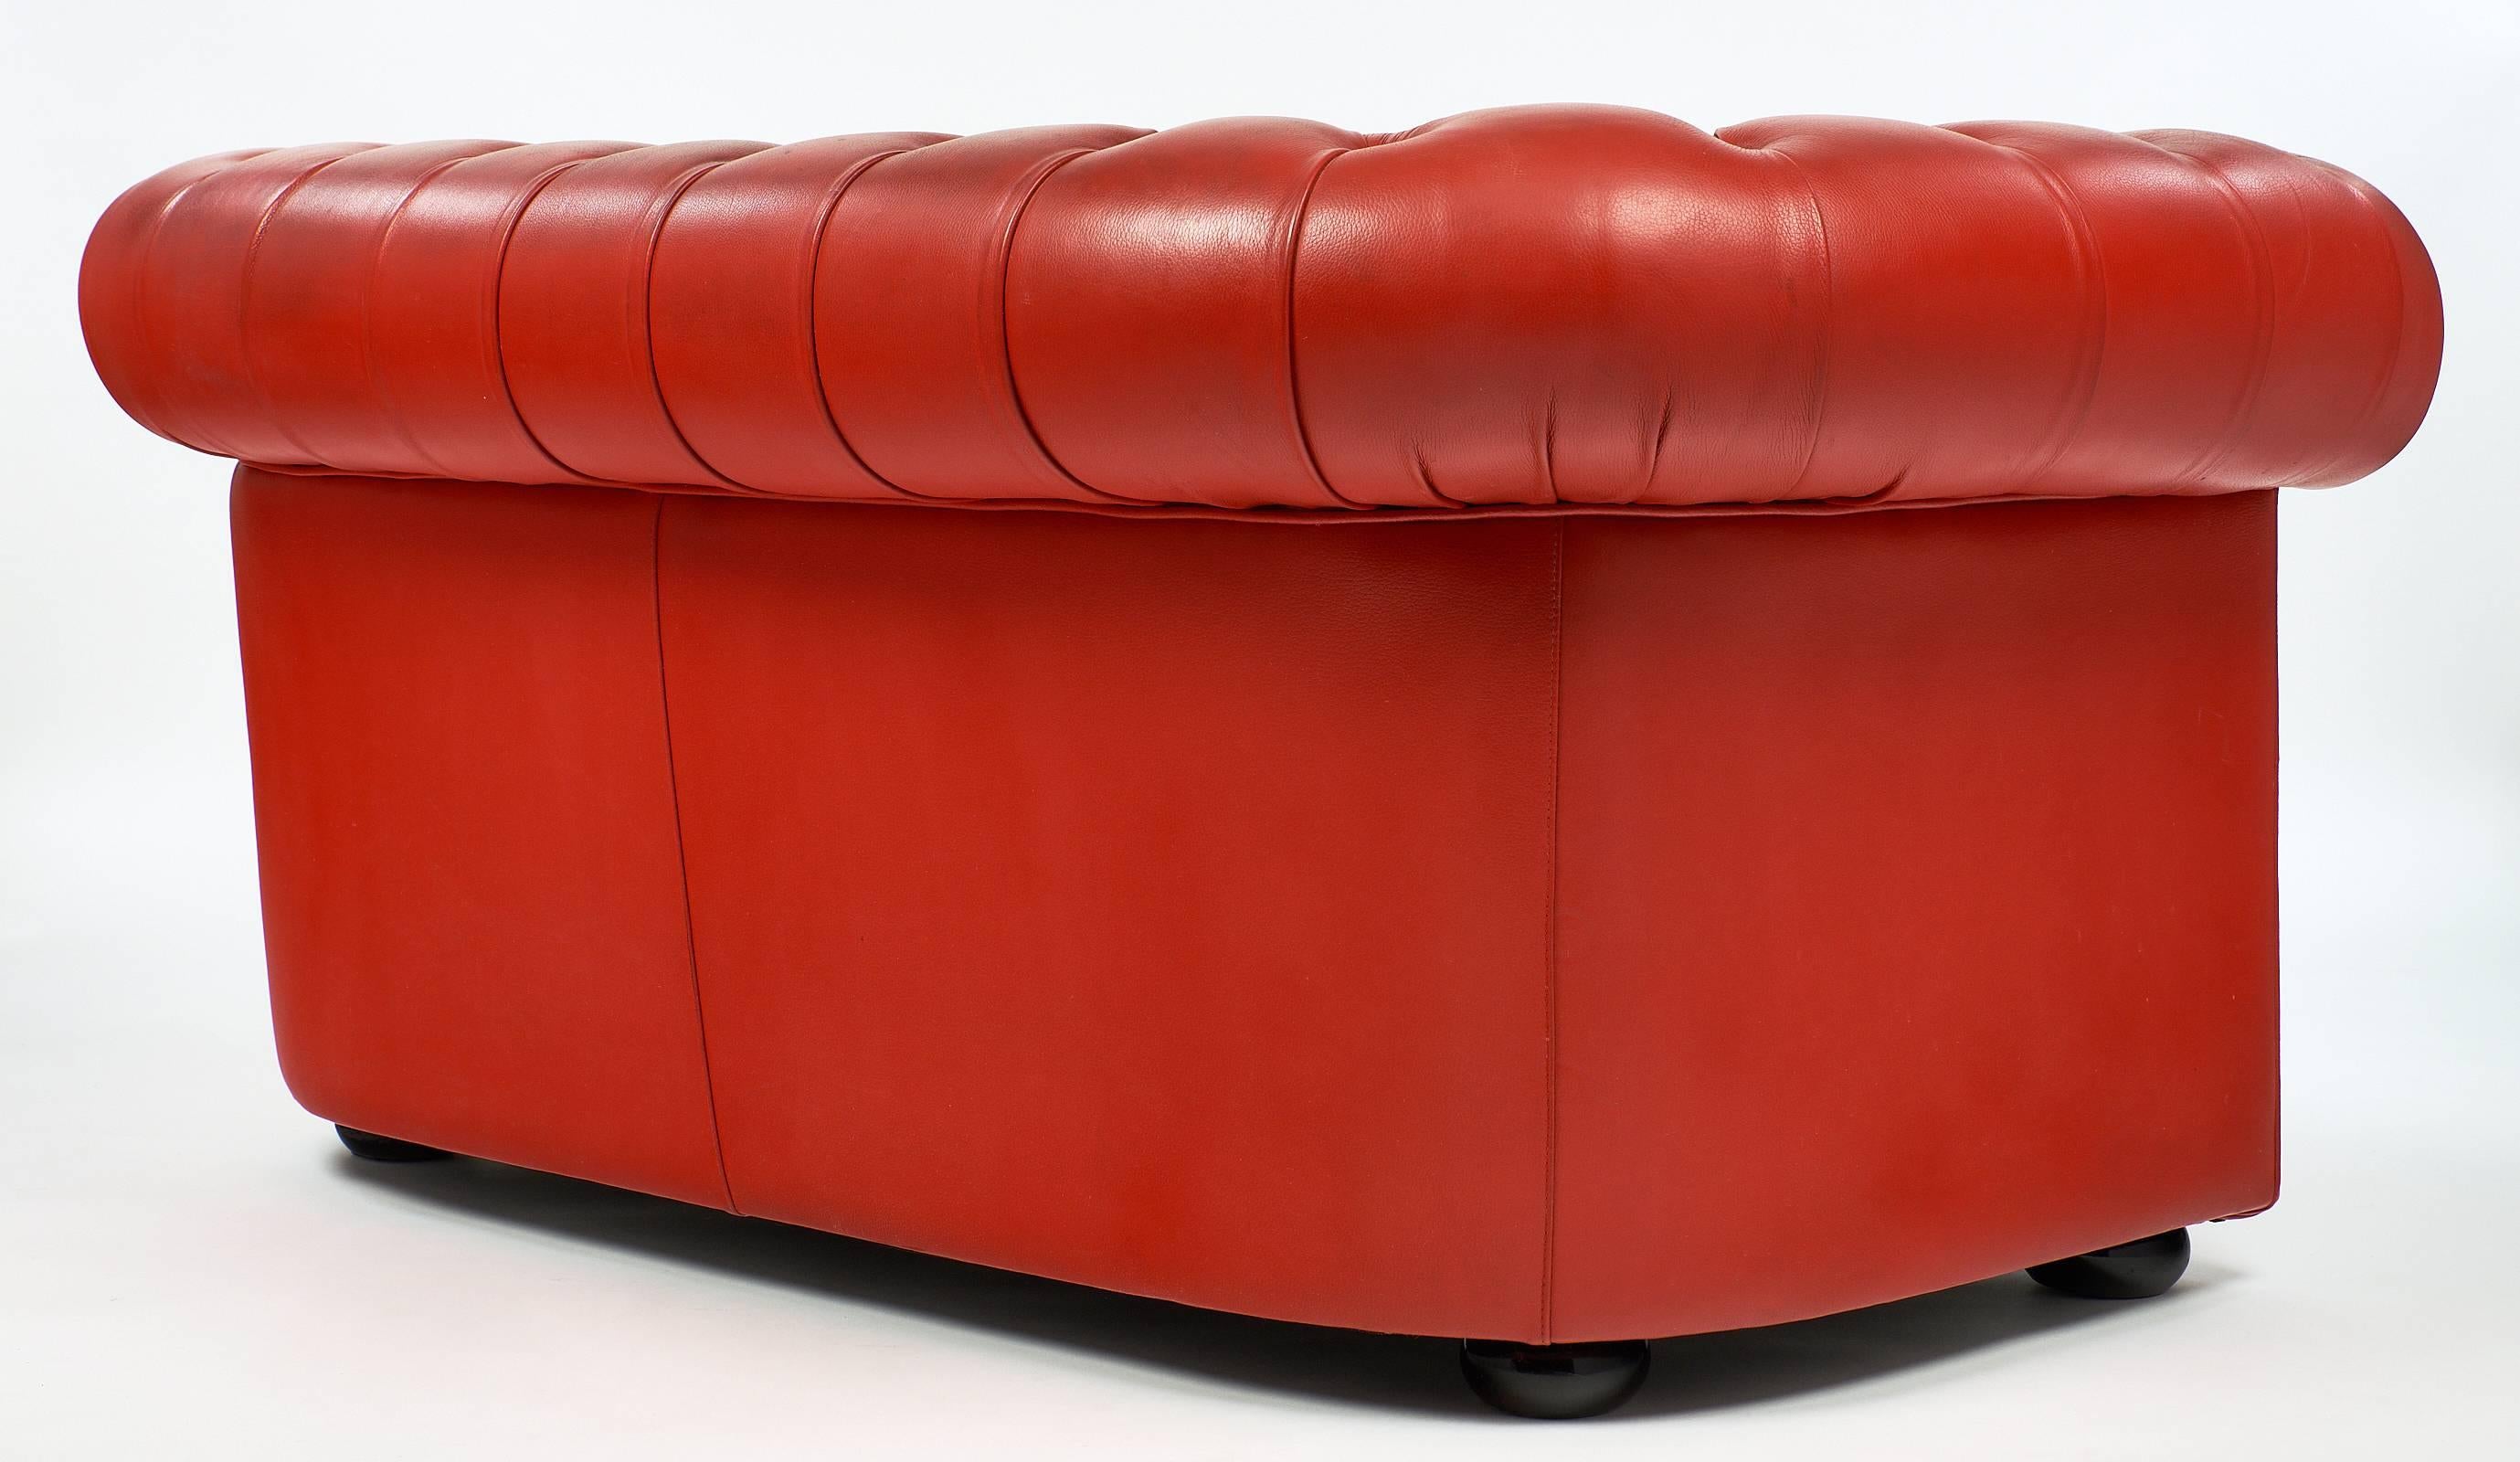 Mid-20th Century Vintage English Red Leather Chesterfield Couch